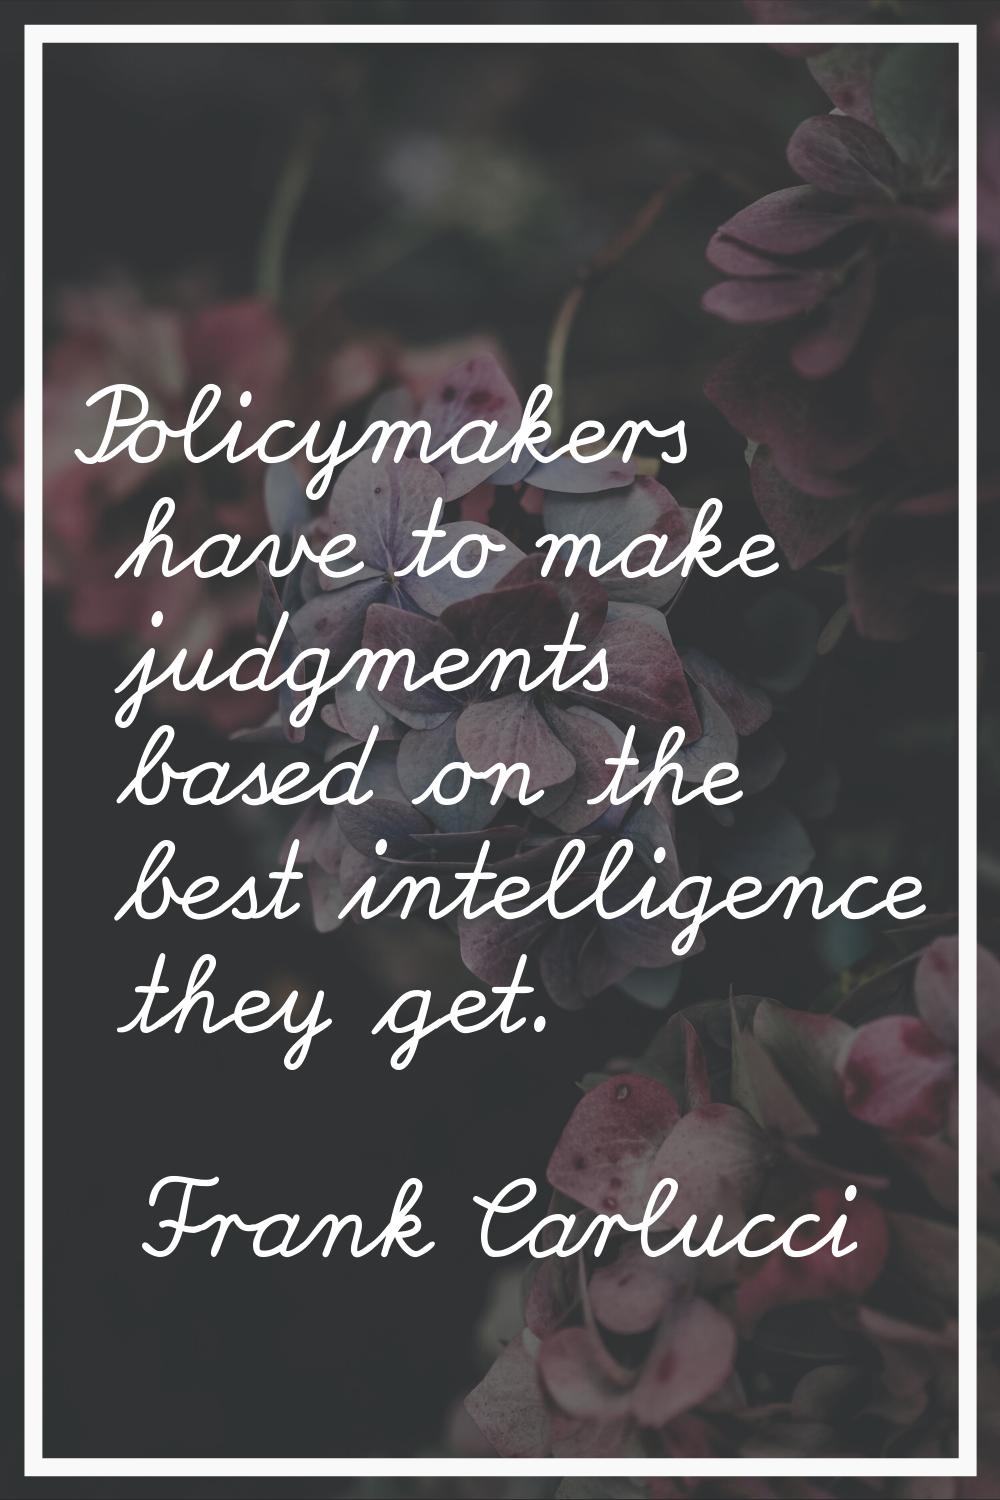 Policymakers have to make judgments based on the best intelligence they get.